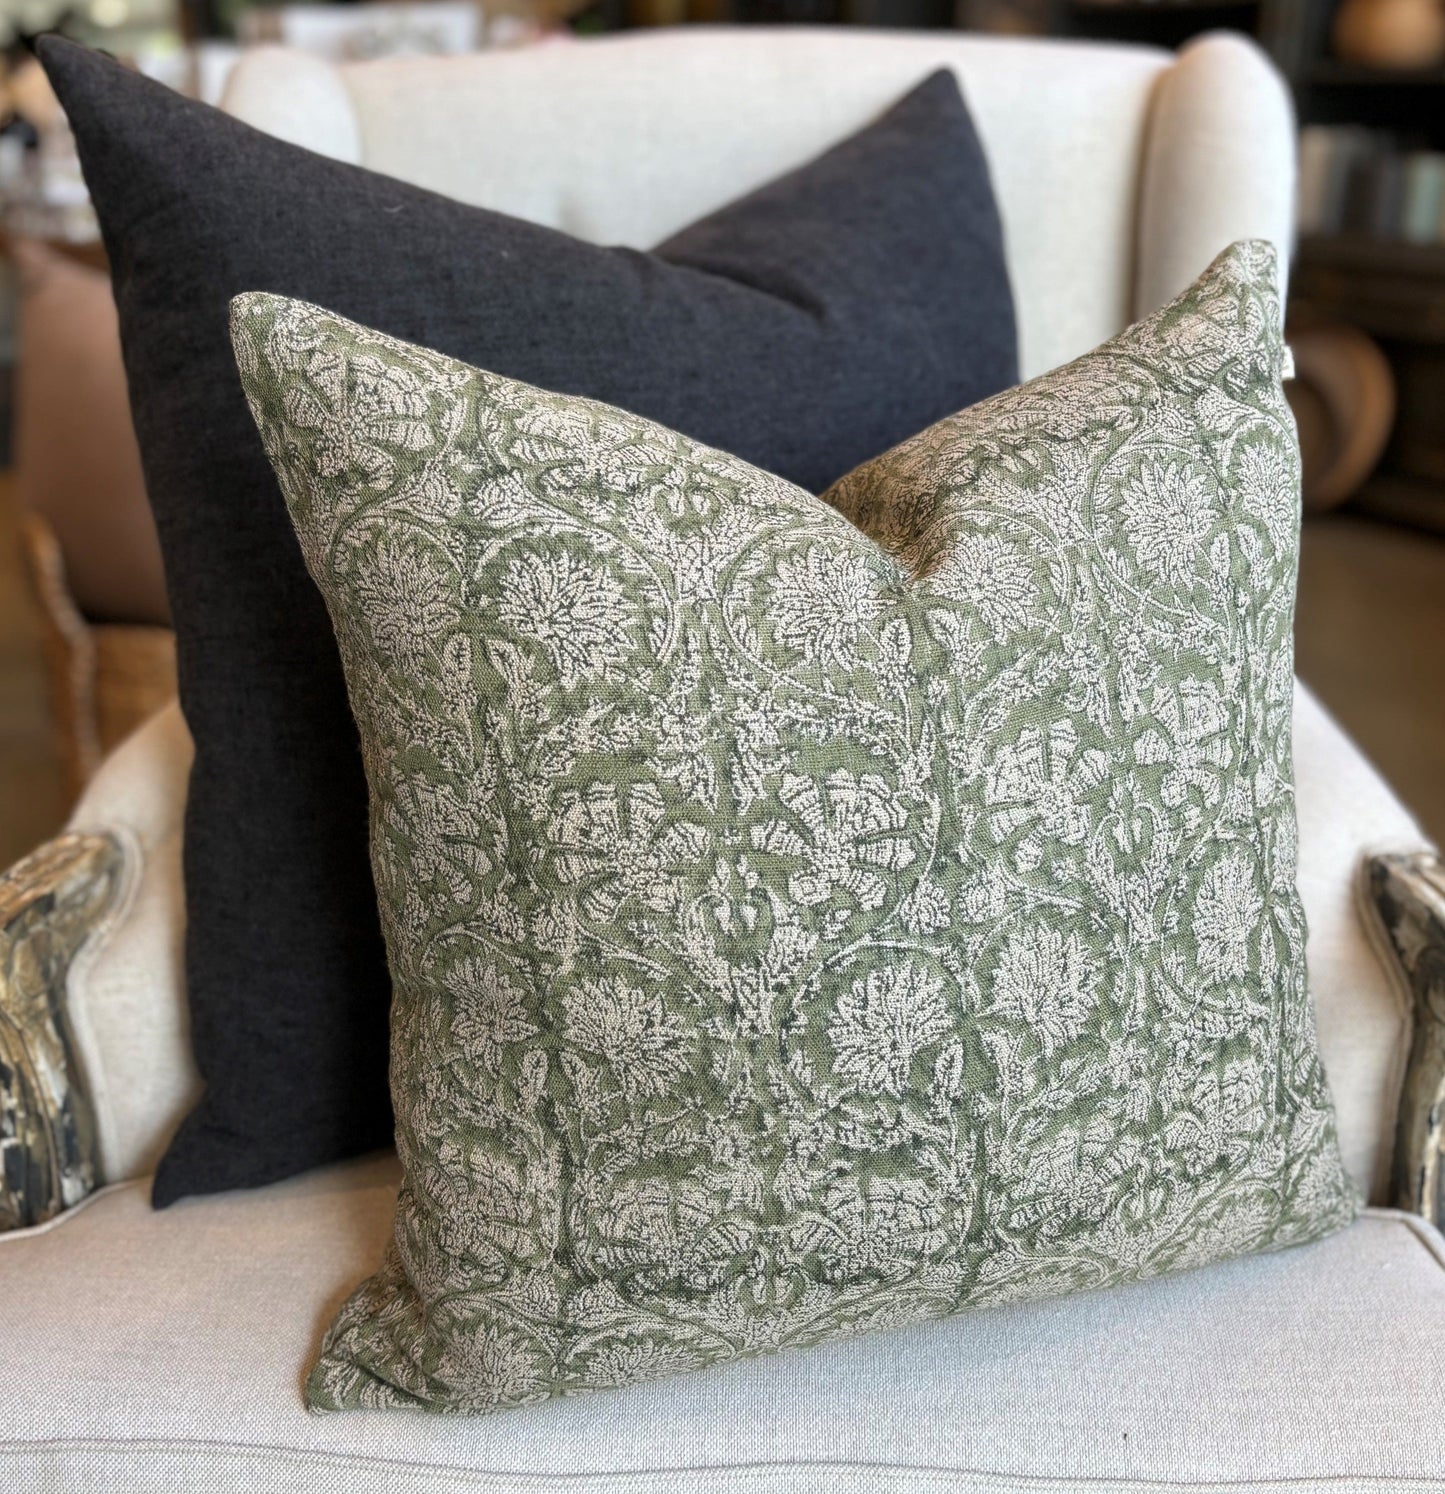 Introducing the Paradise Block Printed Linen Green Cushion crafted by Chamois, a renowned Swedish interior and fashion brand. This stunning addition to your home decor features a traditional Indian block print in a dark blue and natural hue pattern, and is made with 100% Belgian Linen for its superior quality and durability. To ensure maximum comfort, a quality feather insert is also included.